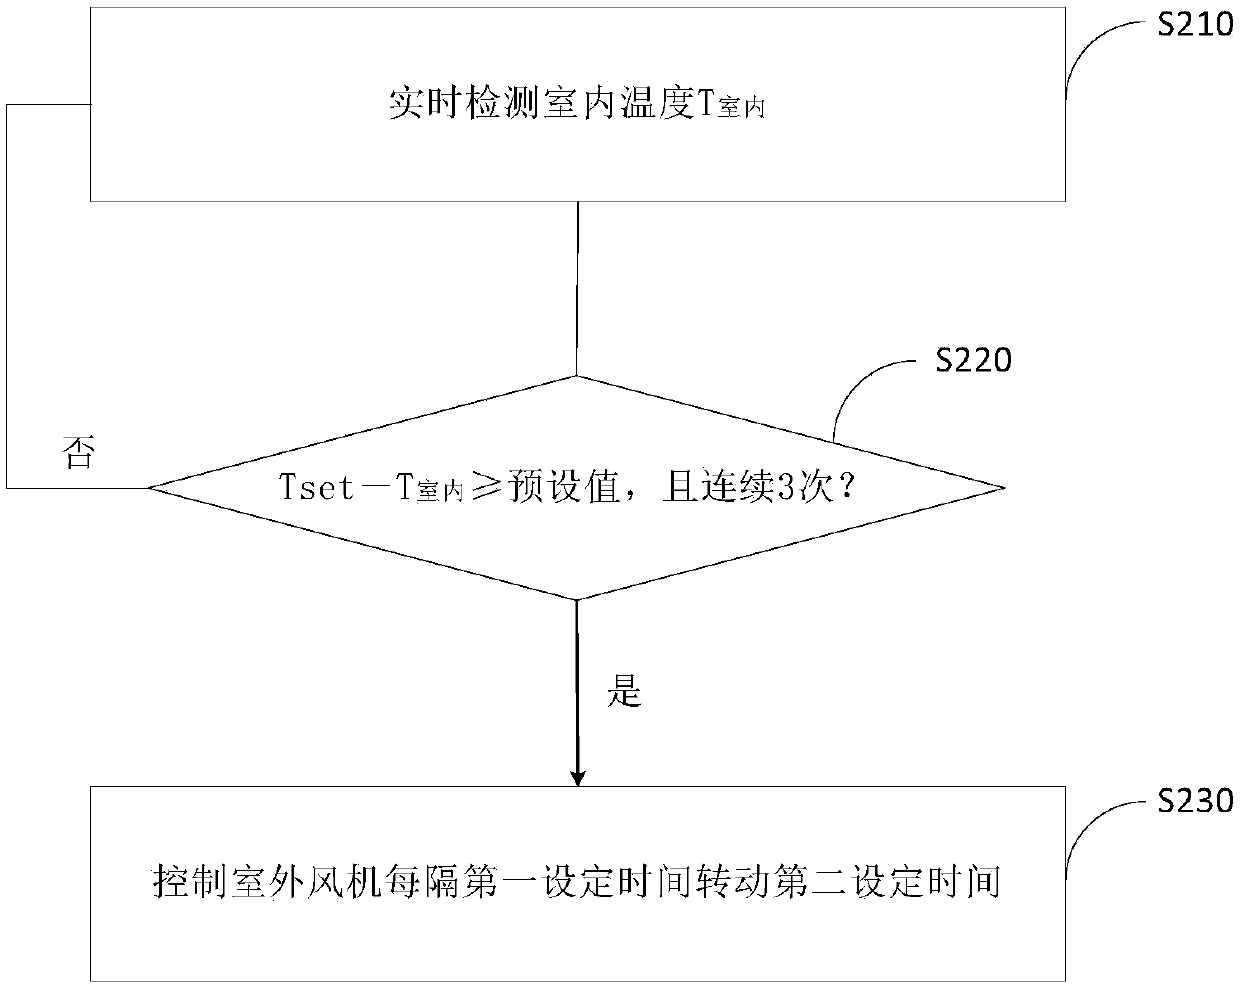 Defrosting control method for fixed-frequency air conditioner